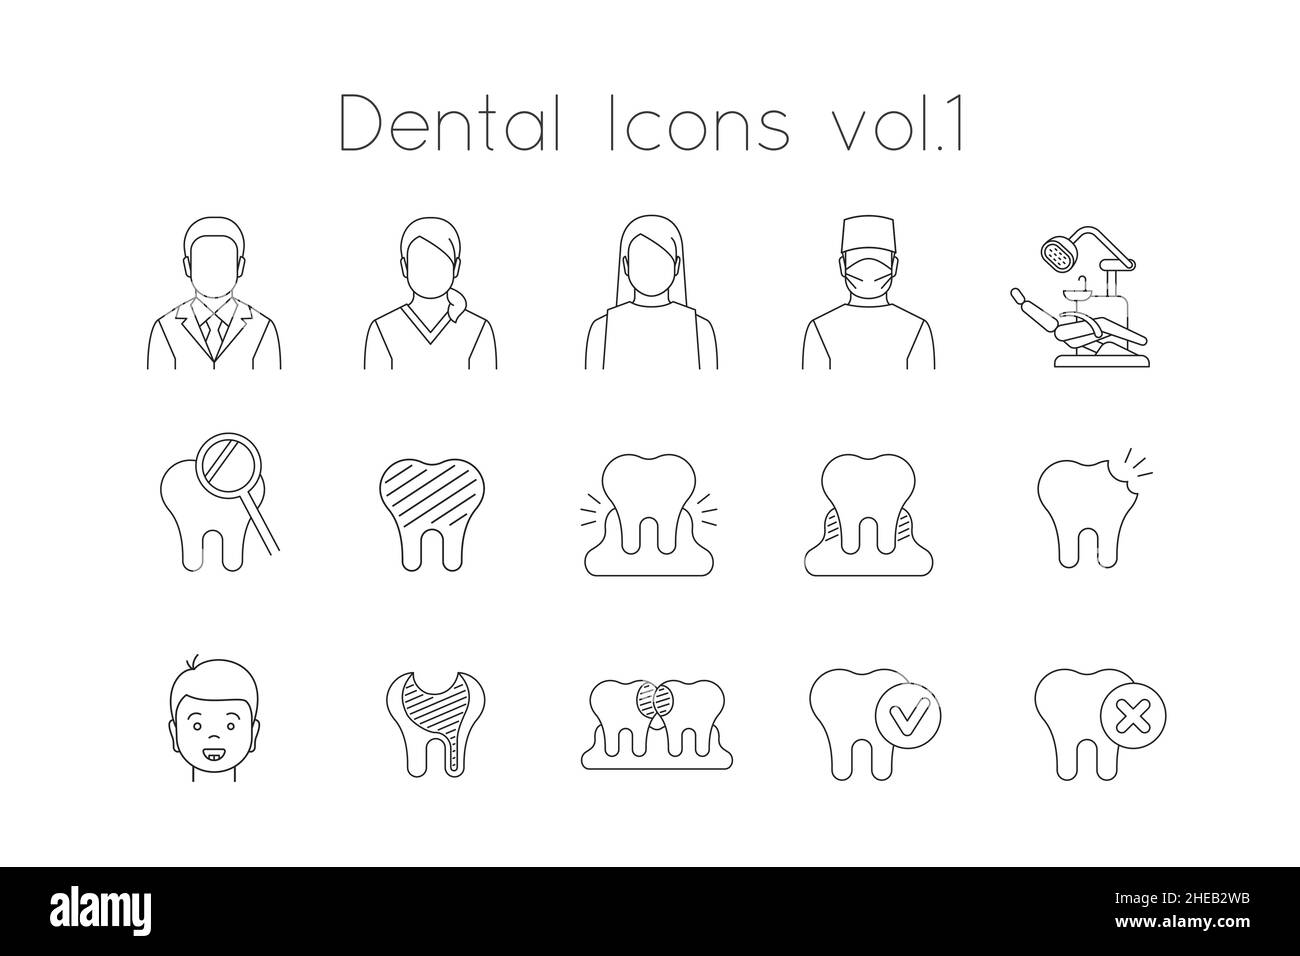 Dentistry icons. Thin line vector signs of dental clinic services. Oral health care concepts. Dentist office staff. Teeth and gums diseases and treatm Stock Vector